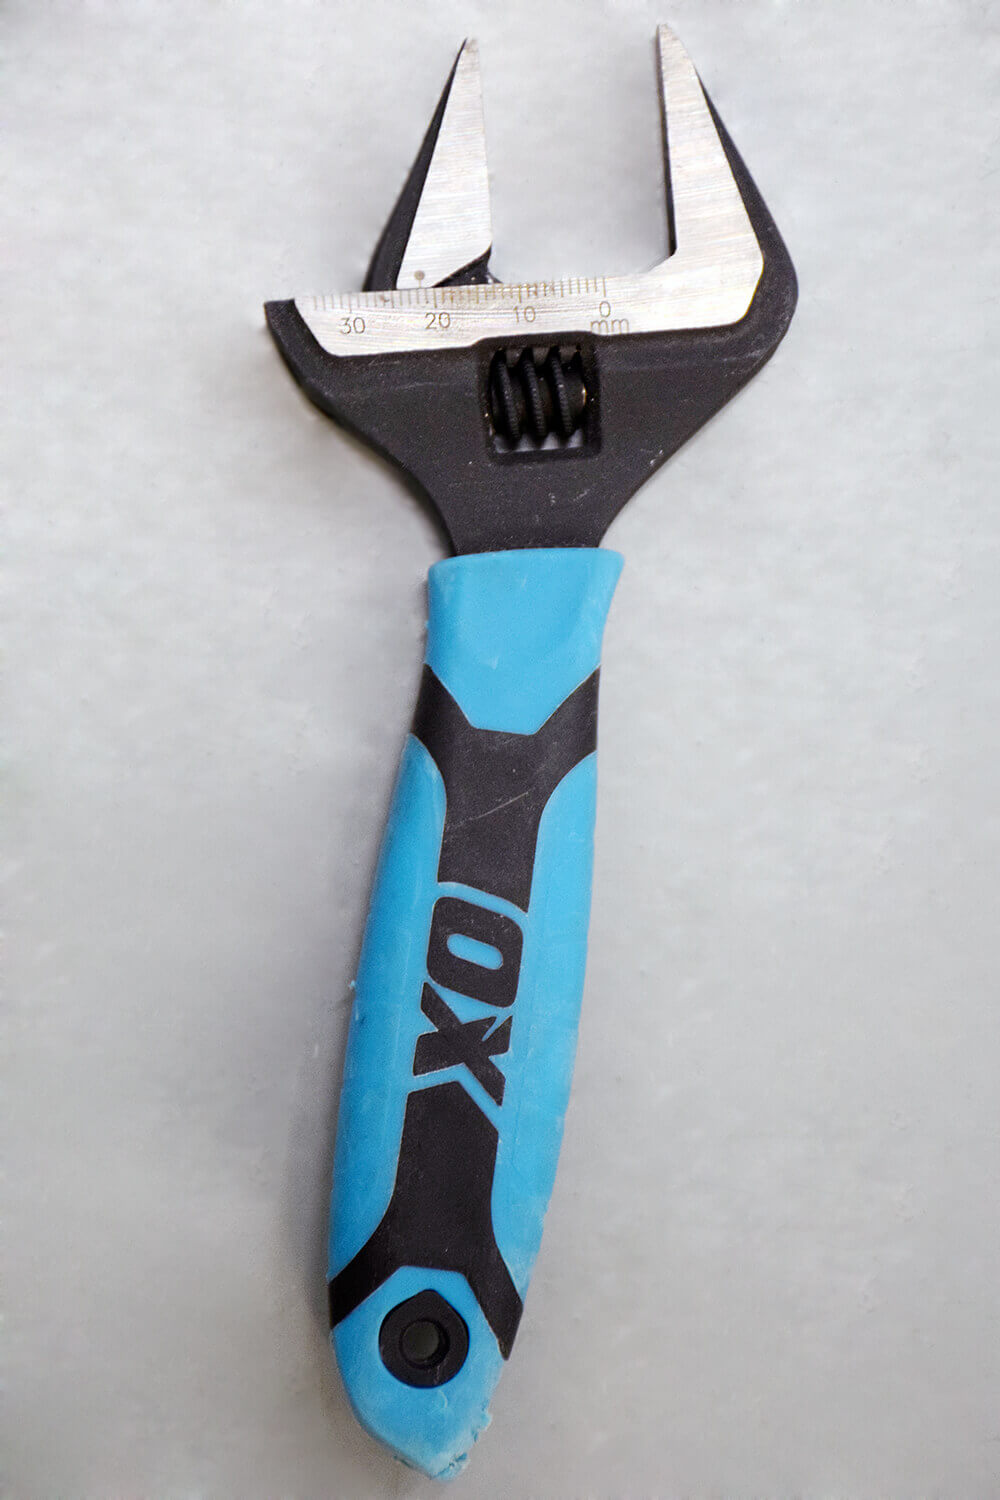 Ox Pro Adjustable Wrench Spanner Wide Head Jaw Heavy Duty Rubber Grip Handle